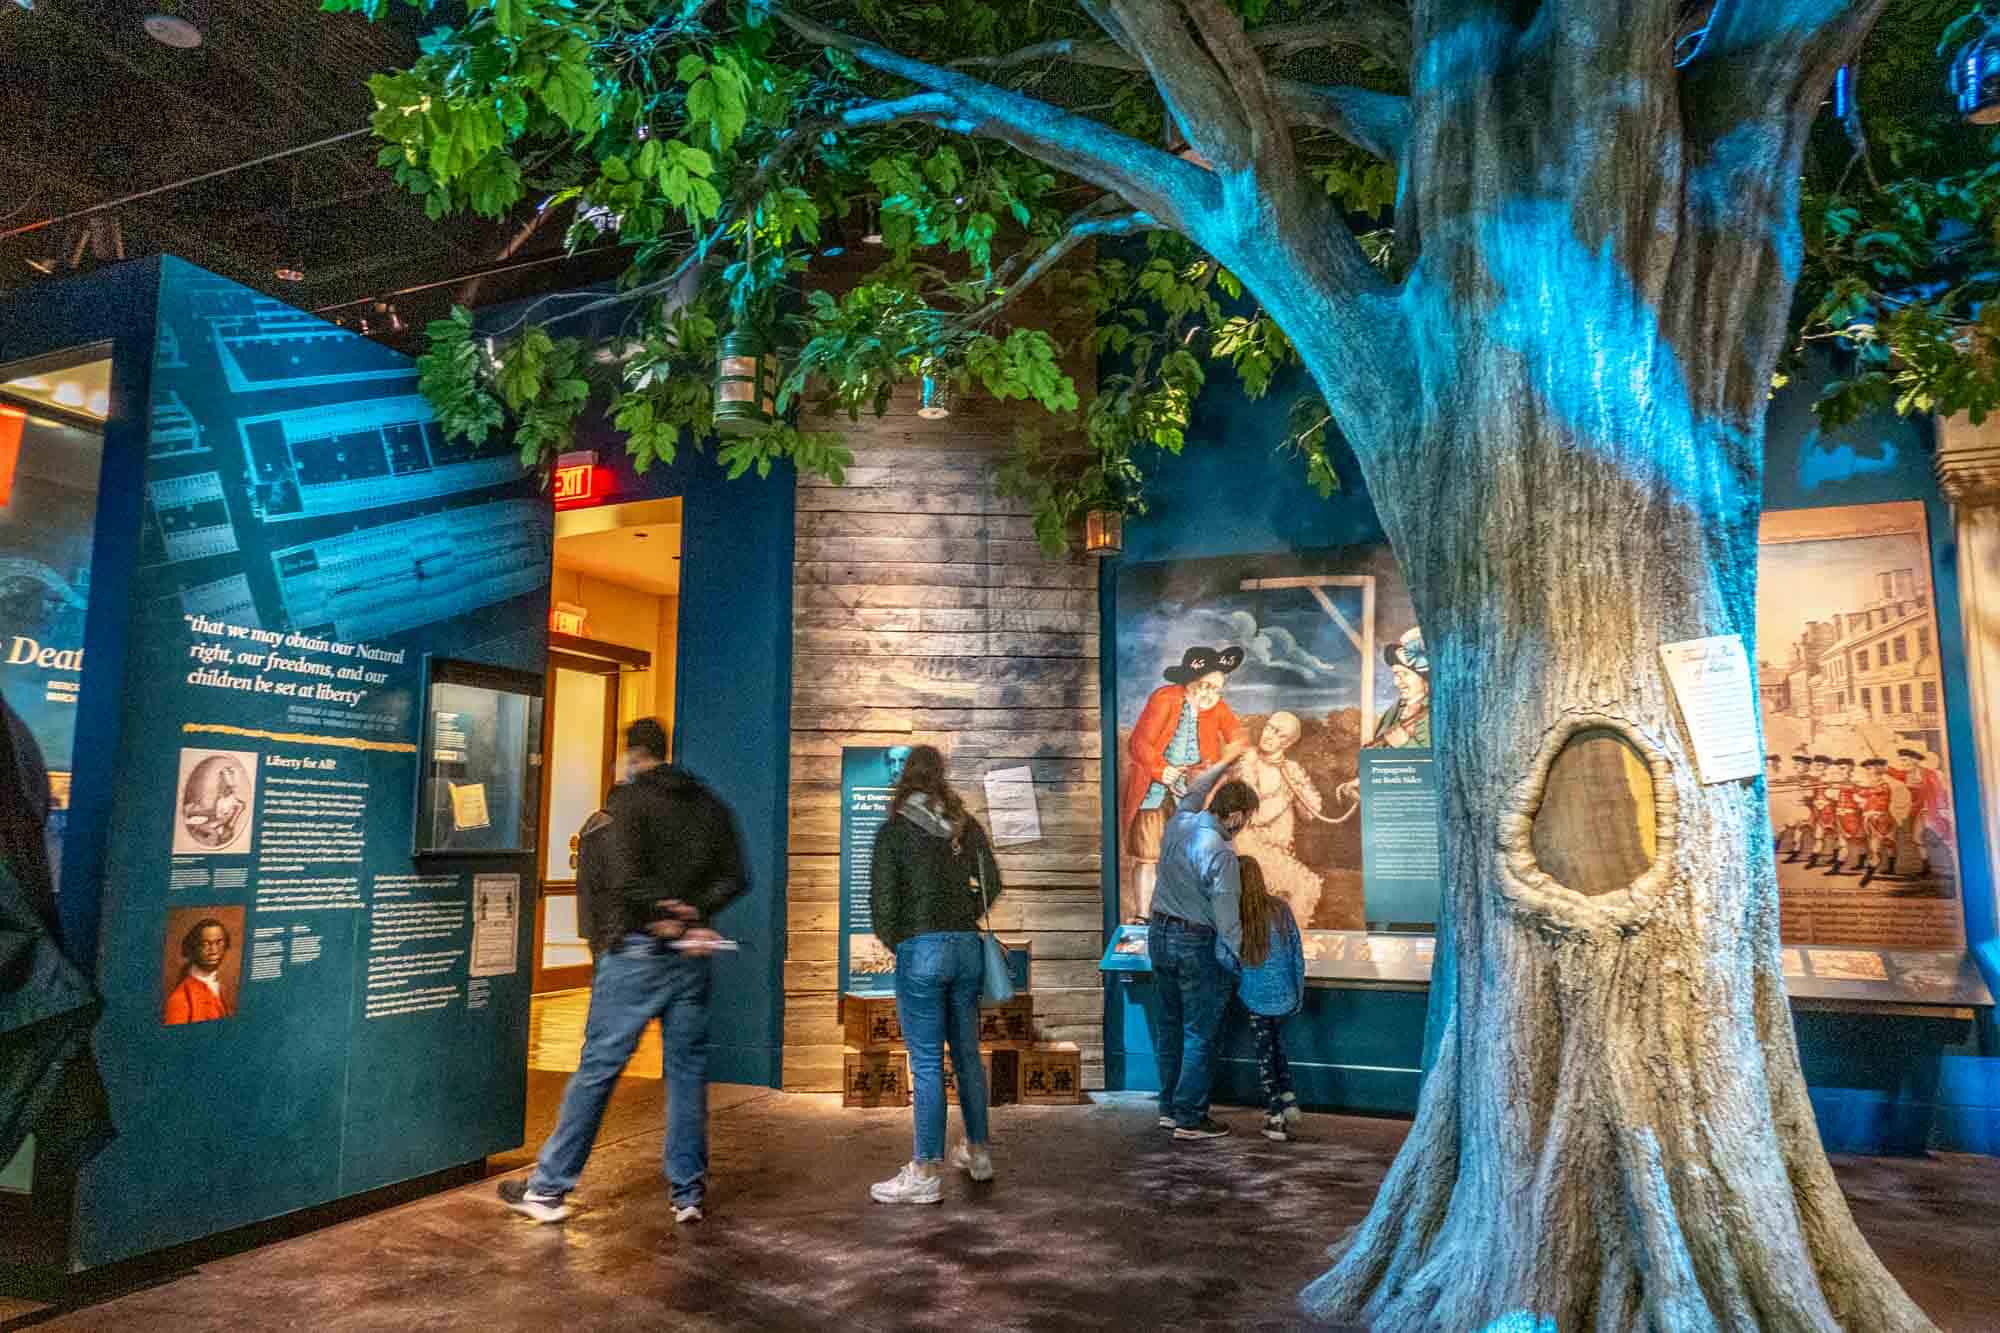 People looking at panels in a museum with a fake tree in the foreground